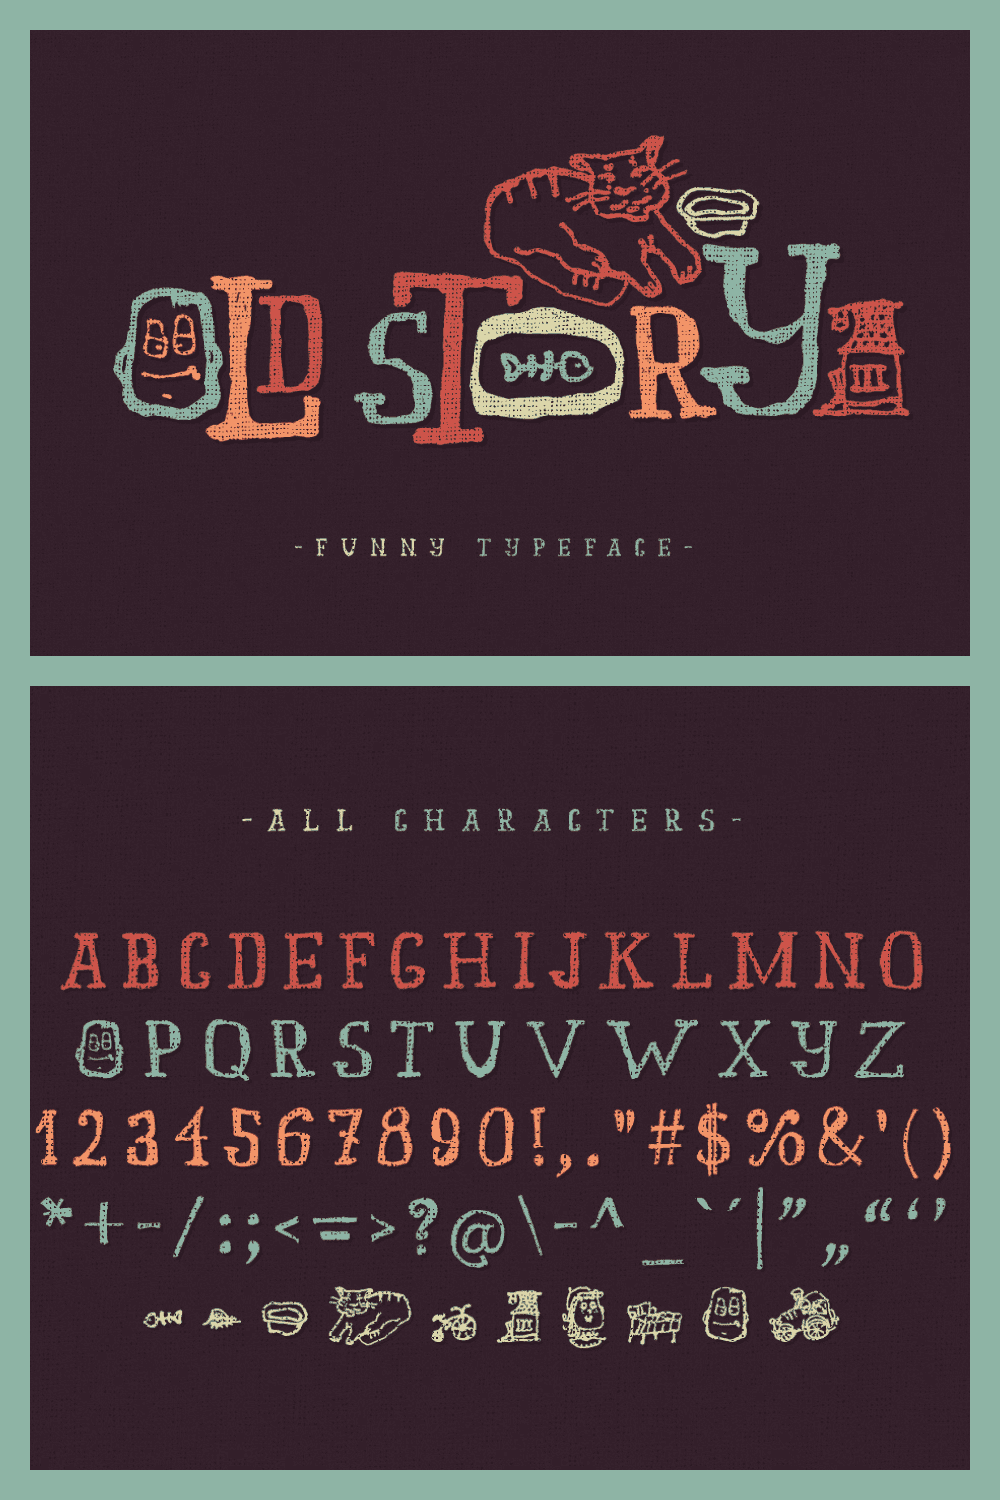 Old story typeface font.